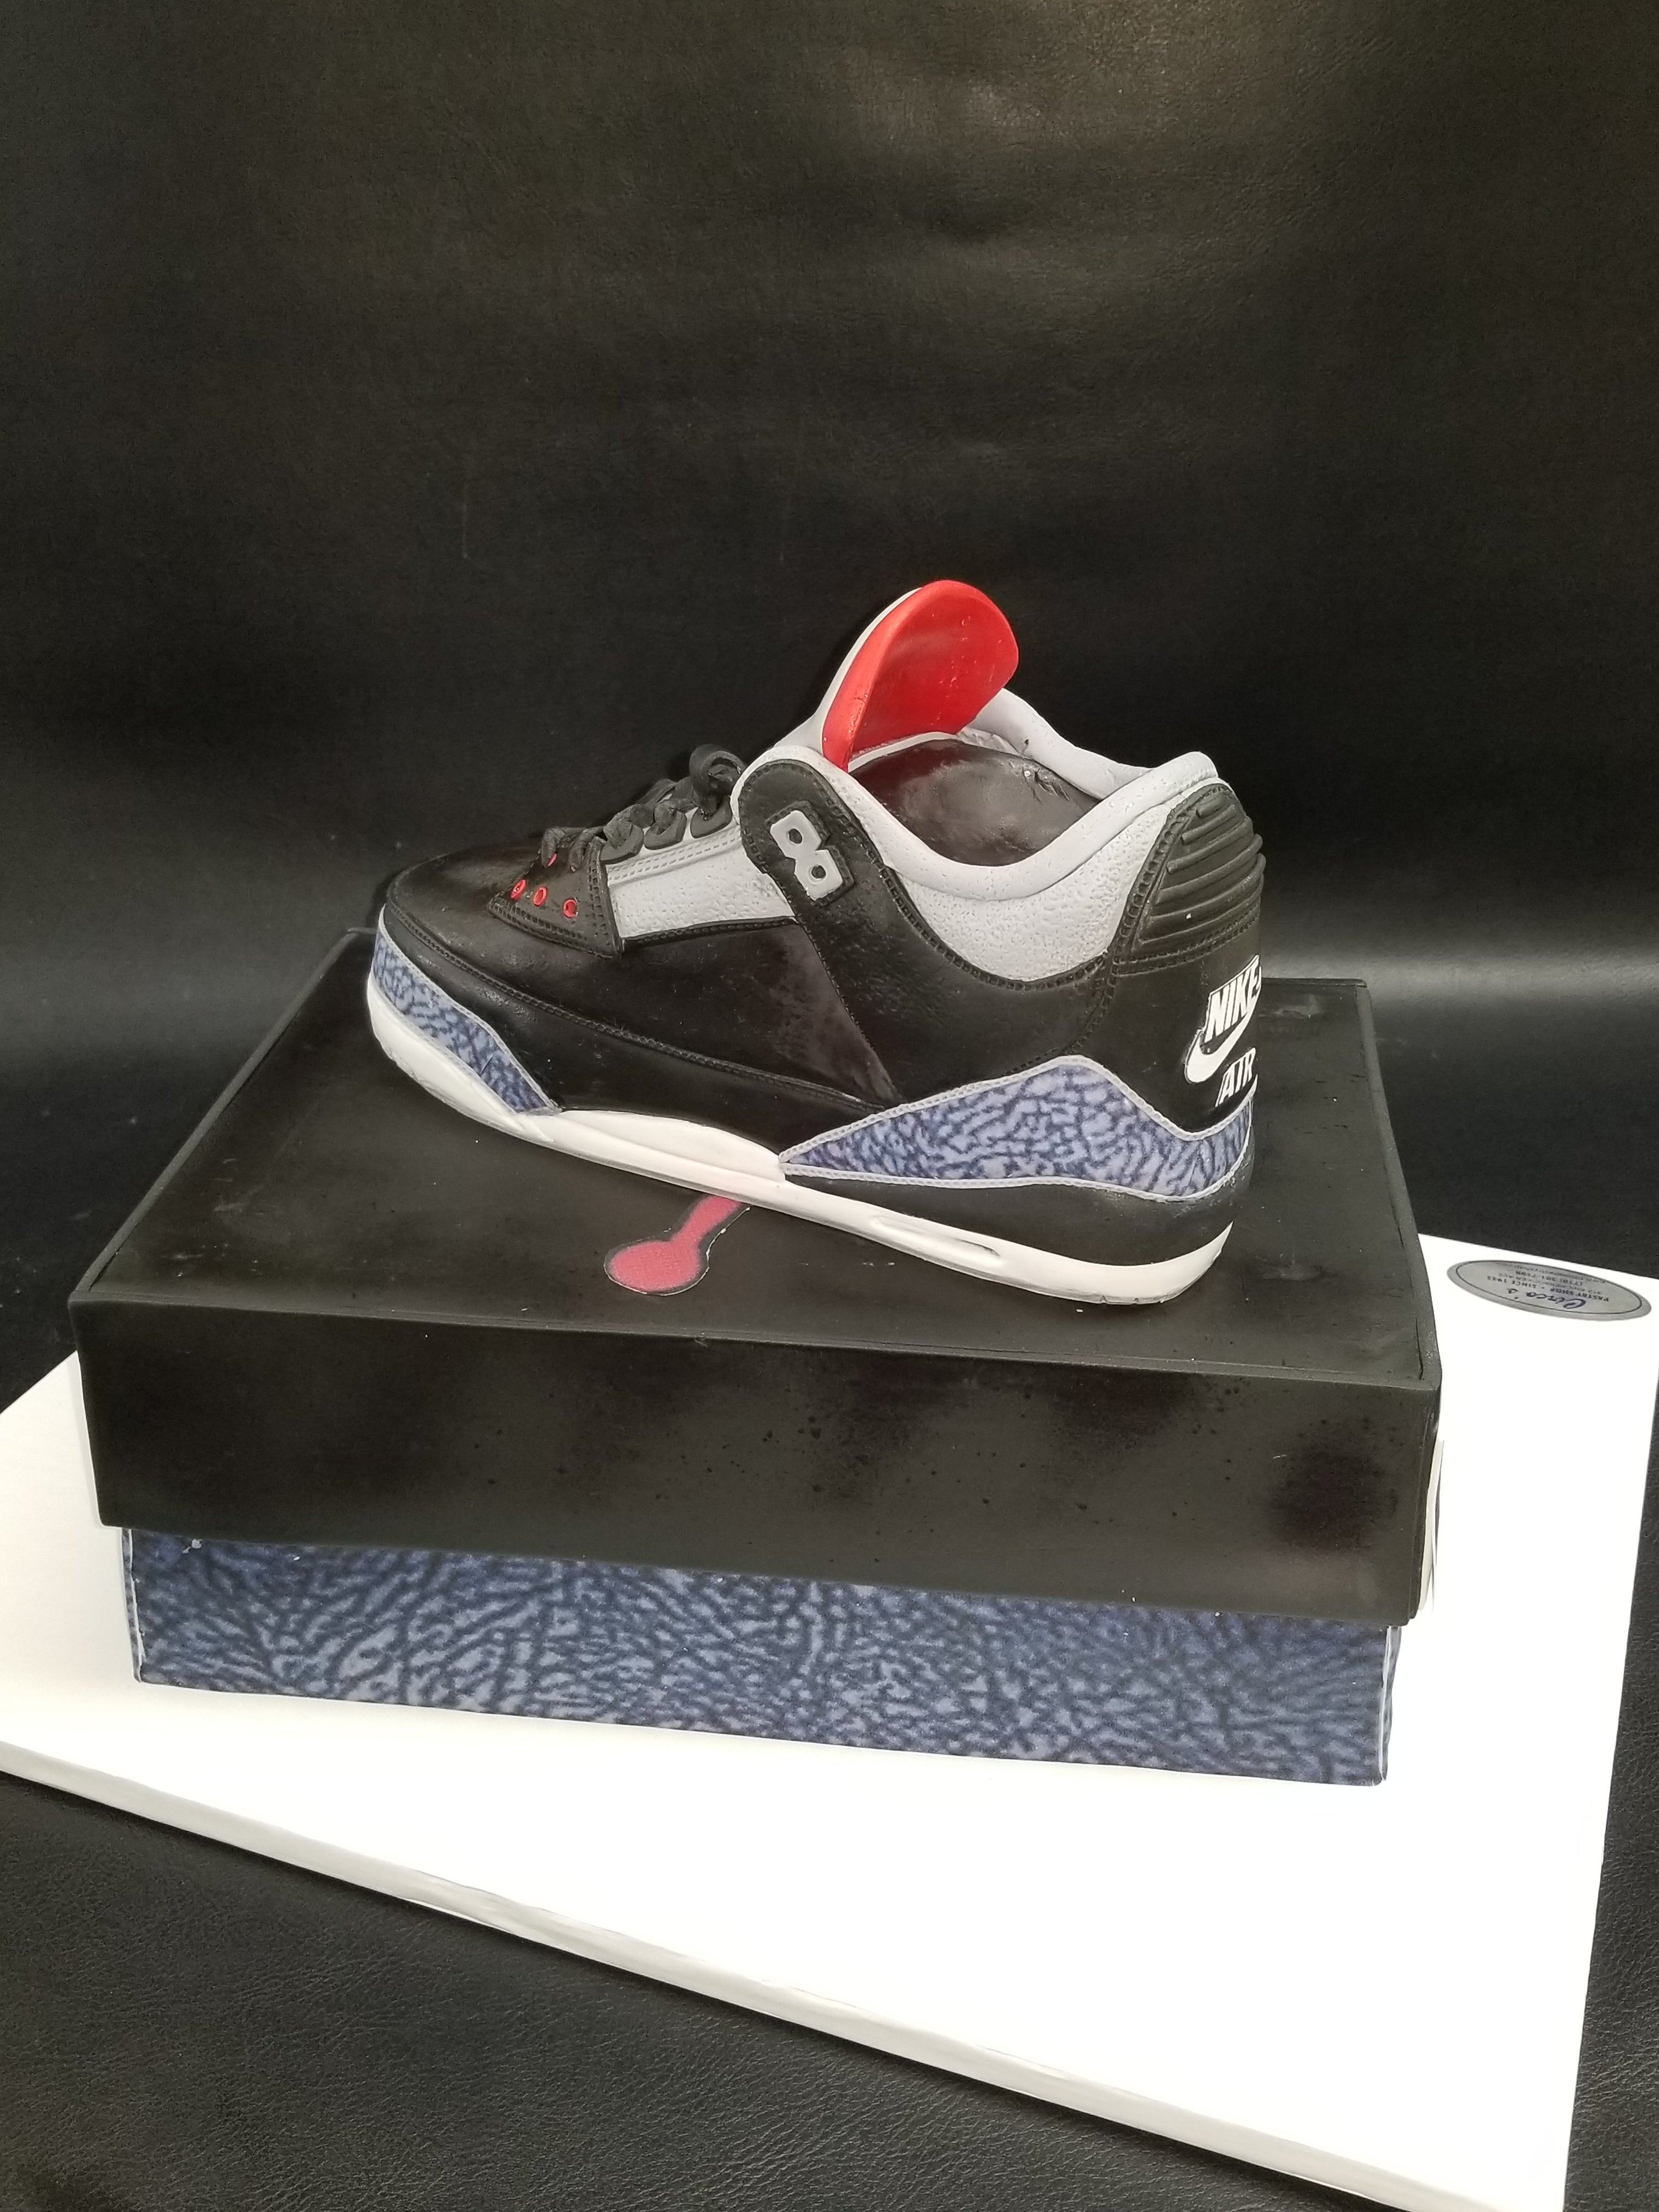 How to make a 10 inch Air jordan sneaker cake from a 9 x 9 inch cake. -  YouTube